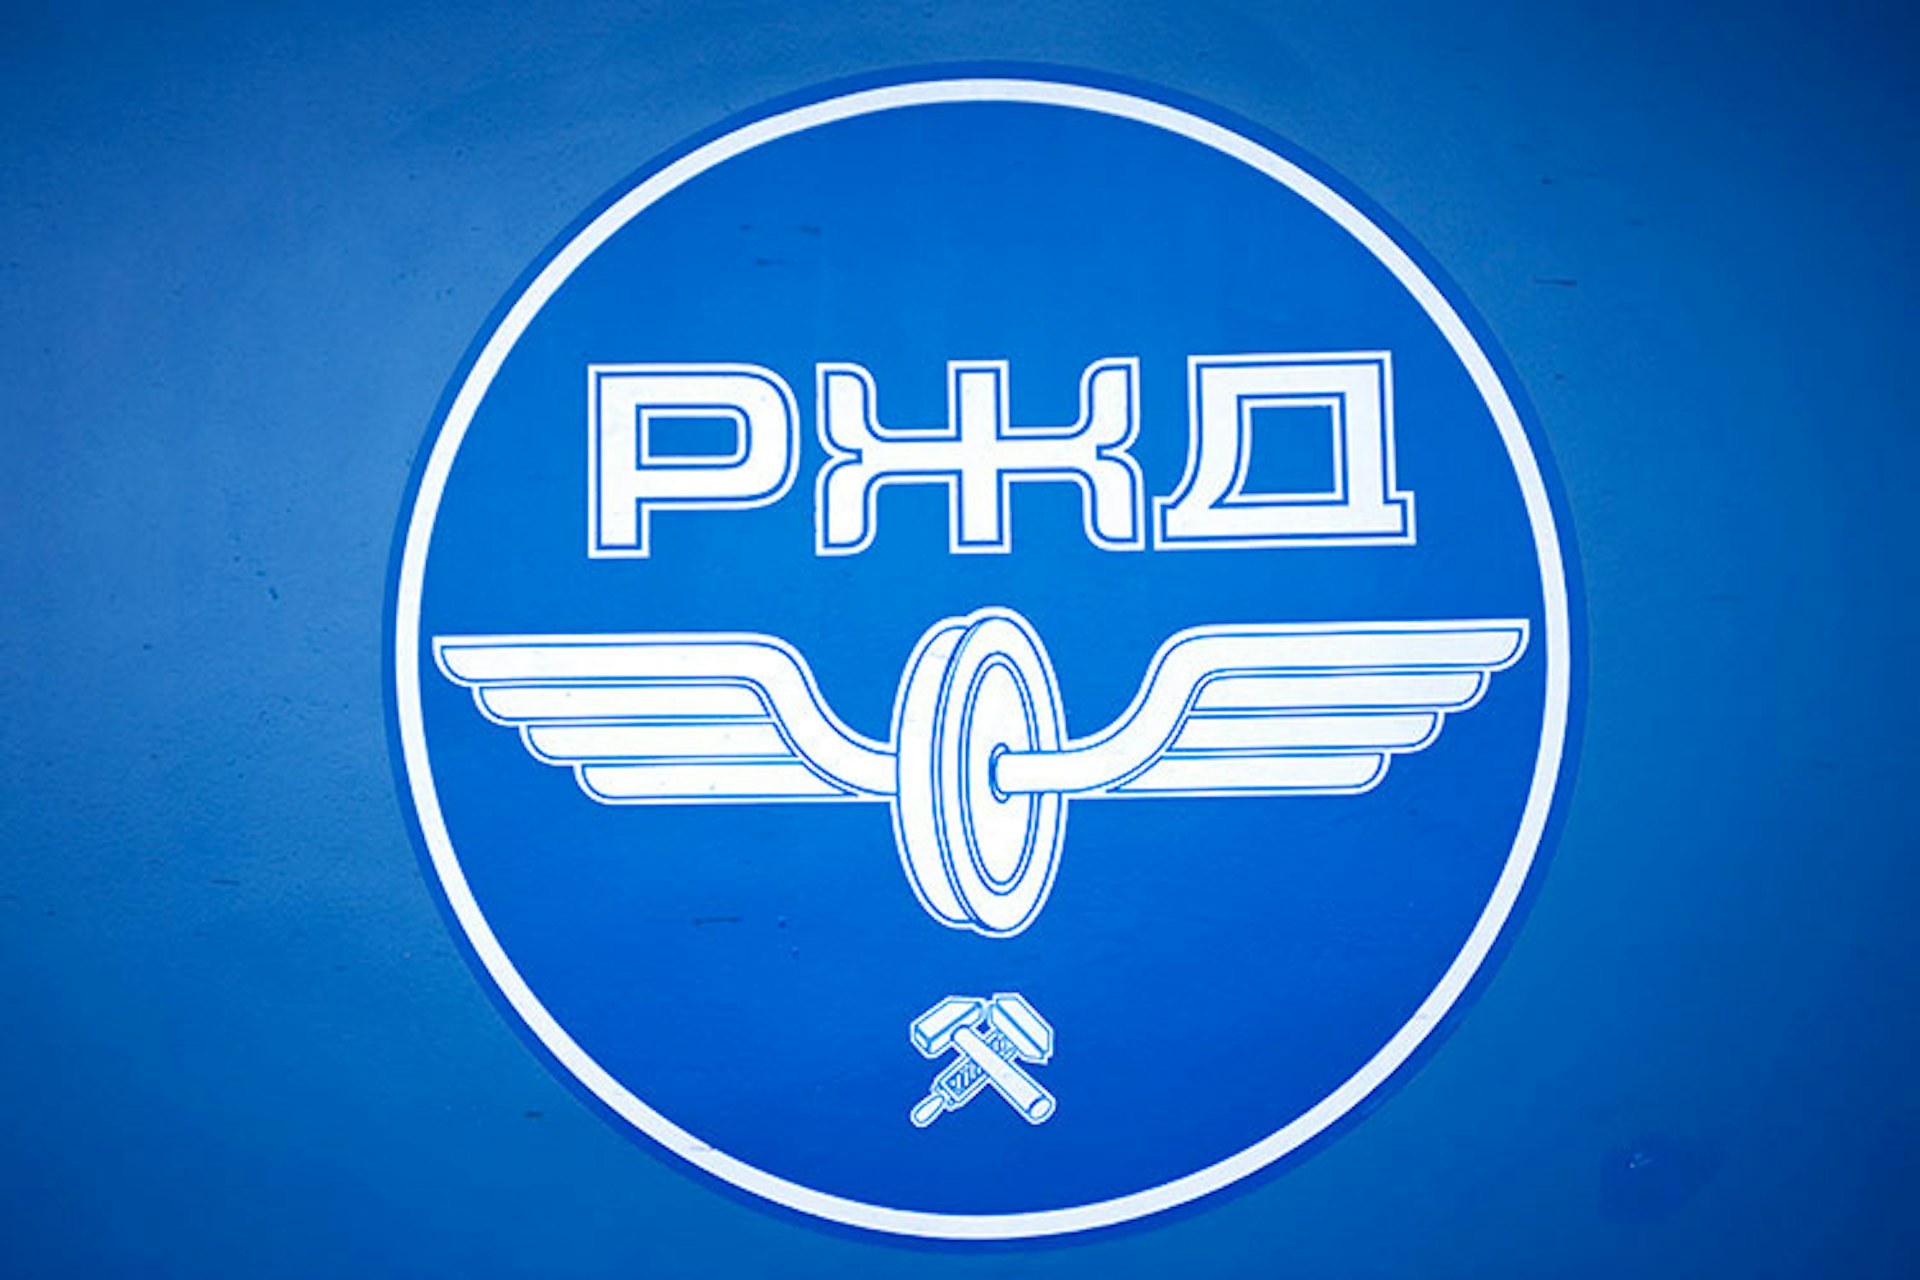 The emblem of Russian Railways © Nick Laing / AWL Images / Getty Images